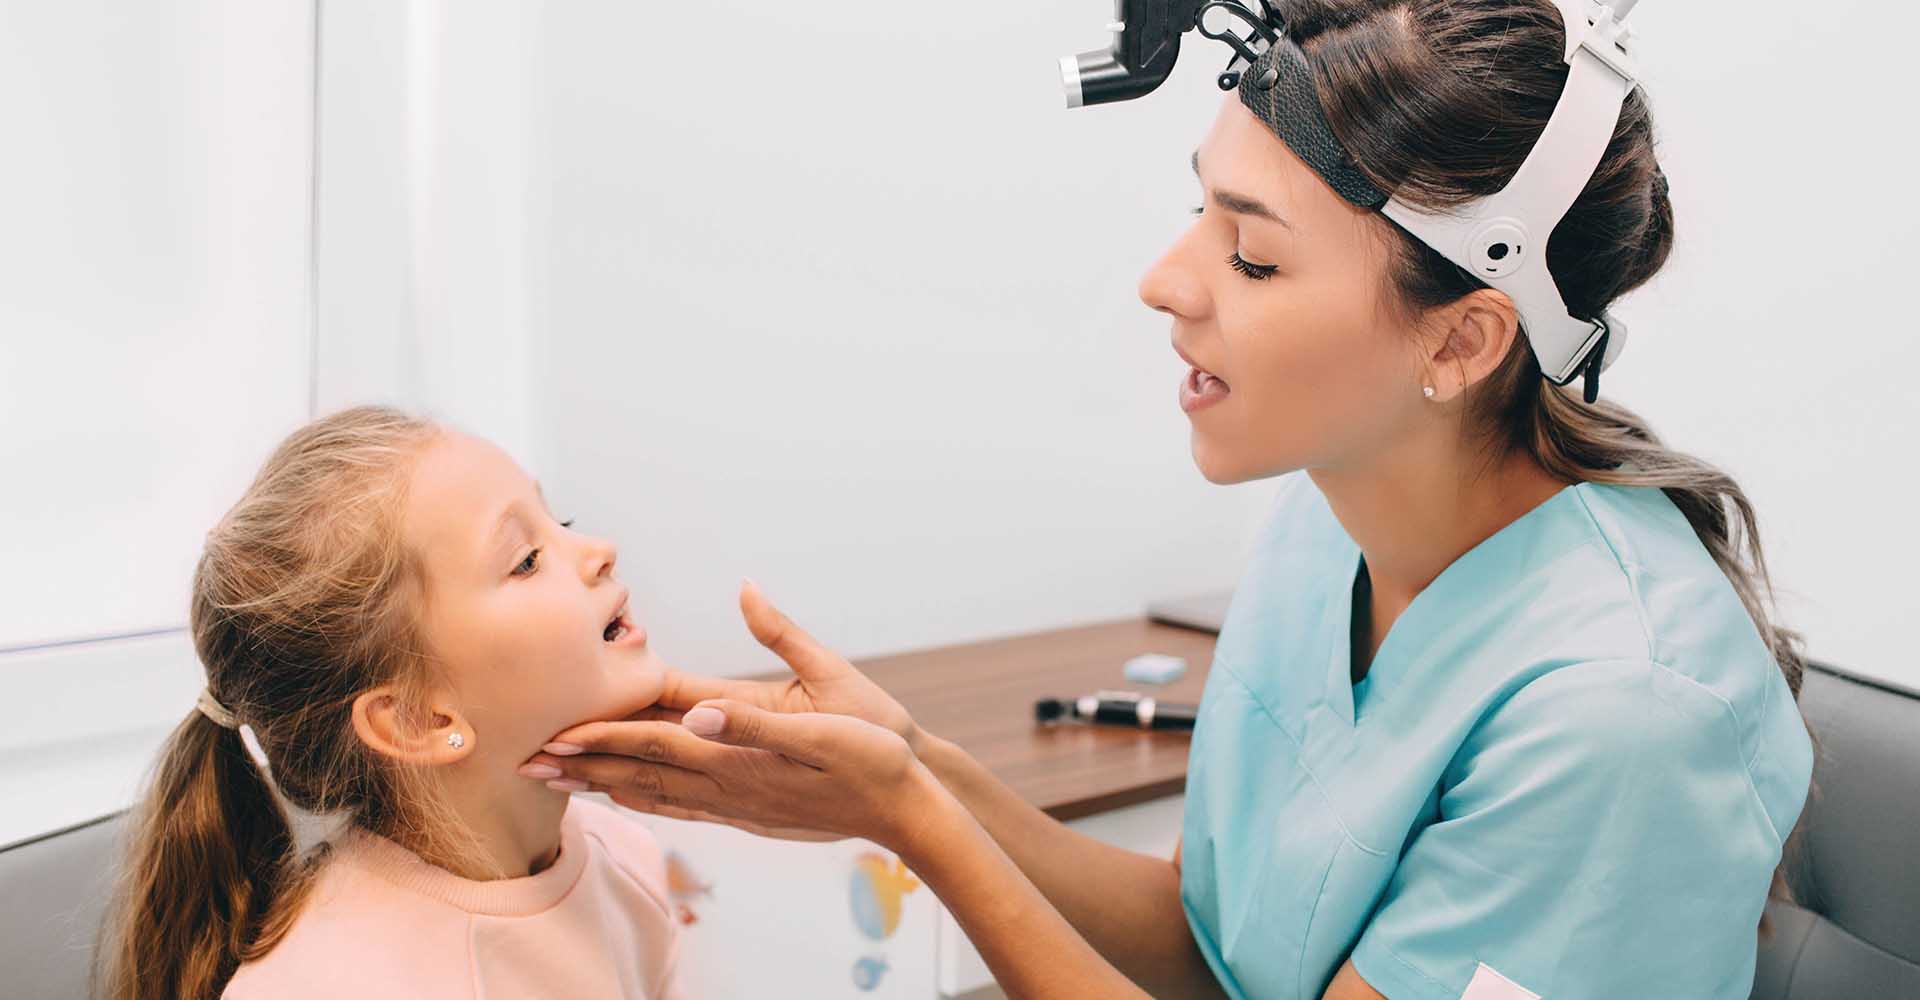 ENT doctor examining mouth of little girl at clinic